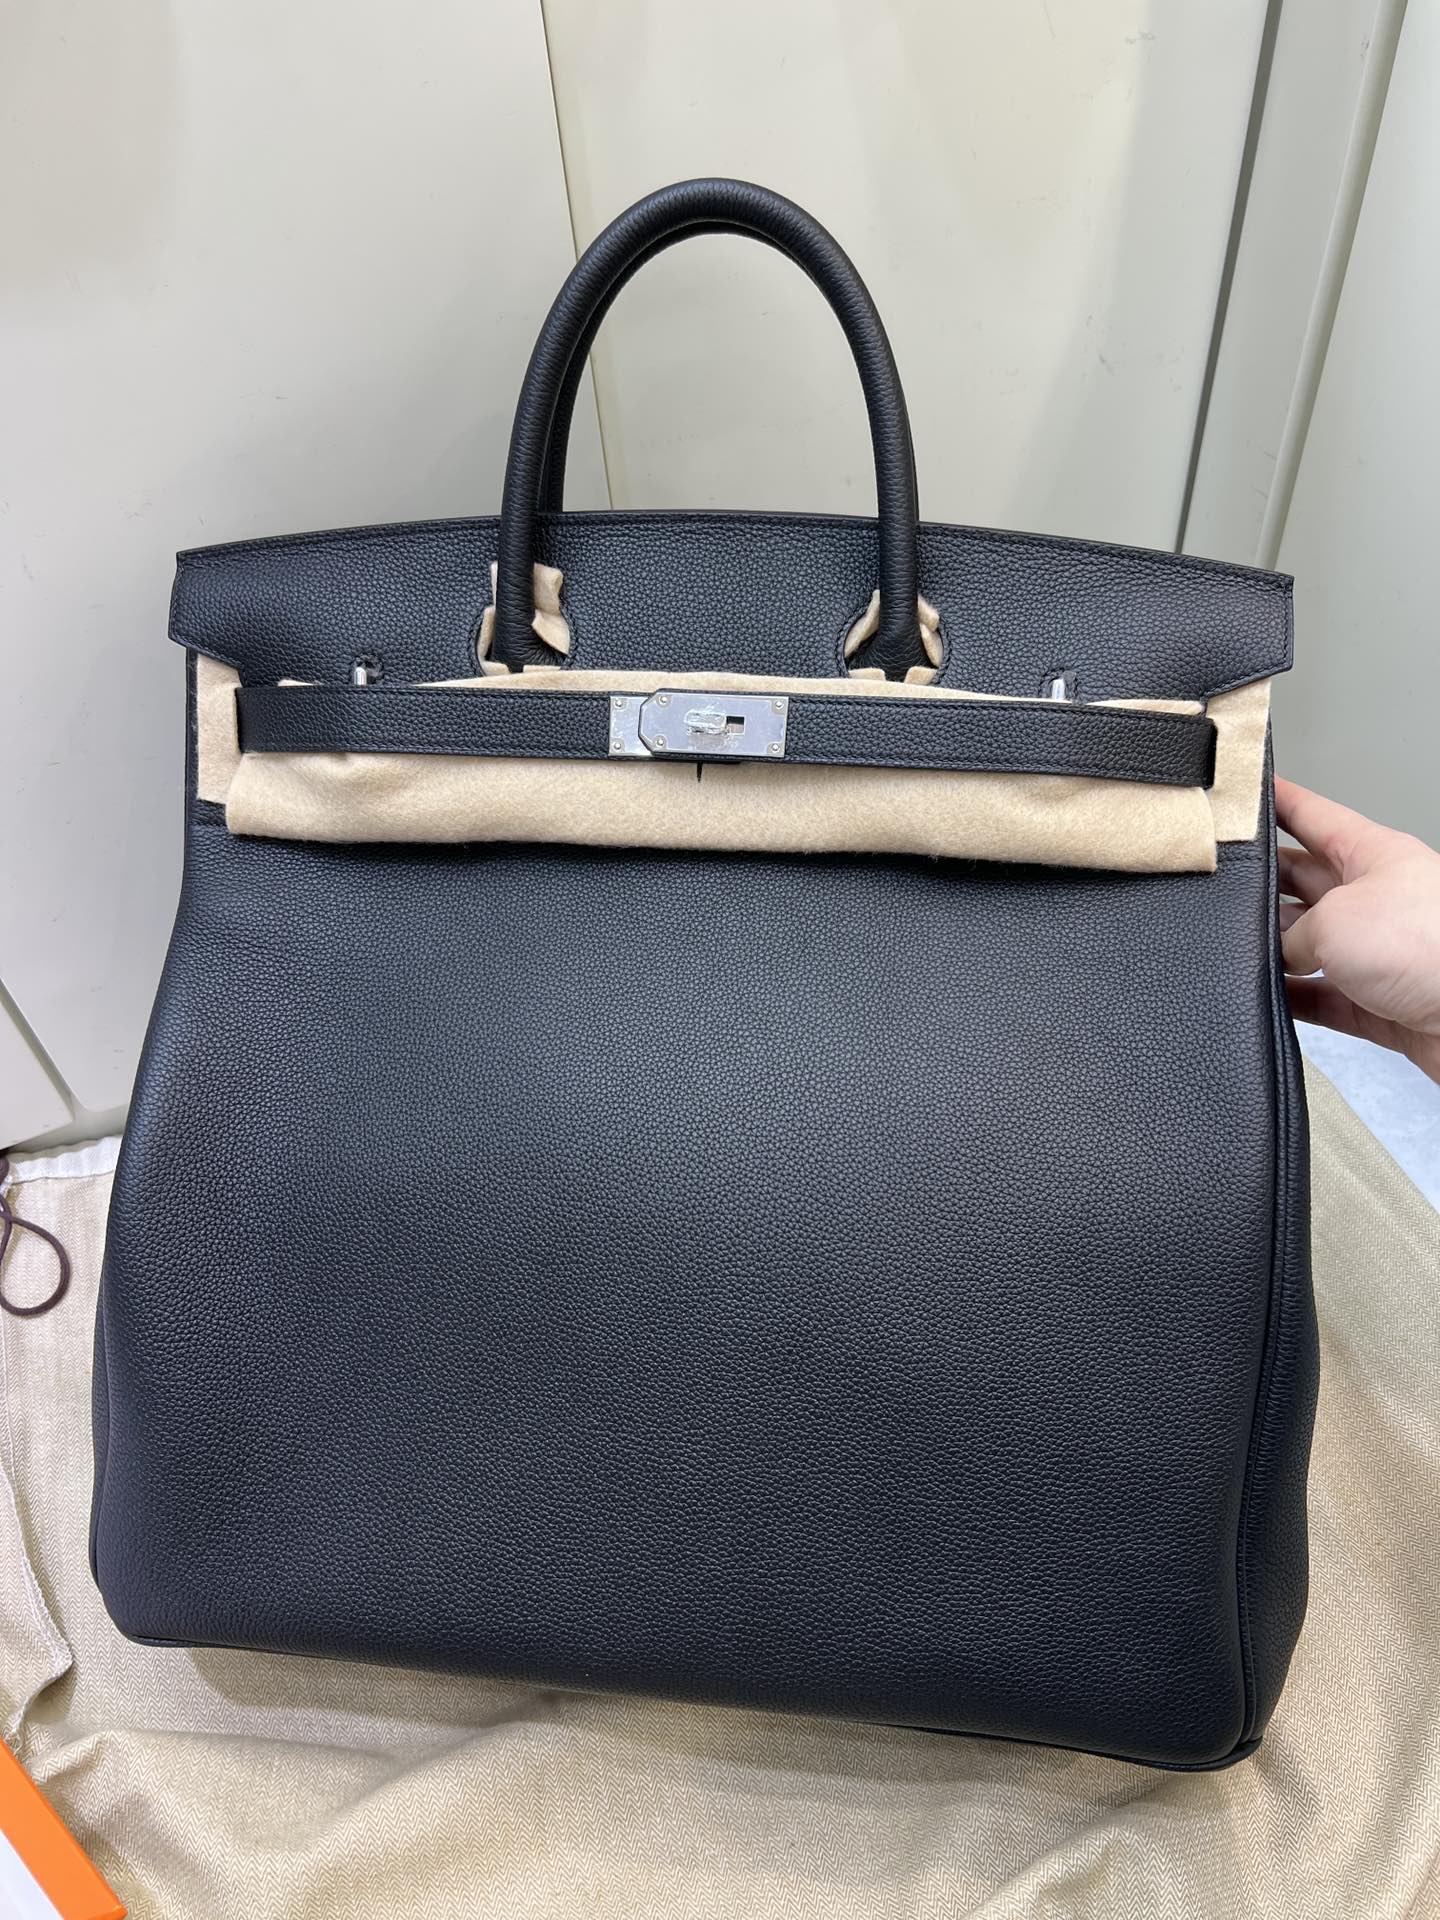 REAL 1:1 HAND-STITCHED HERMES HAC 40 Togo Gold, BLACK, Etoupe, Etain, BLUE  NUIT and Various colors can be customized : u/HooooGoods